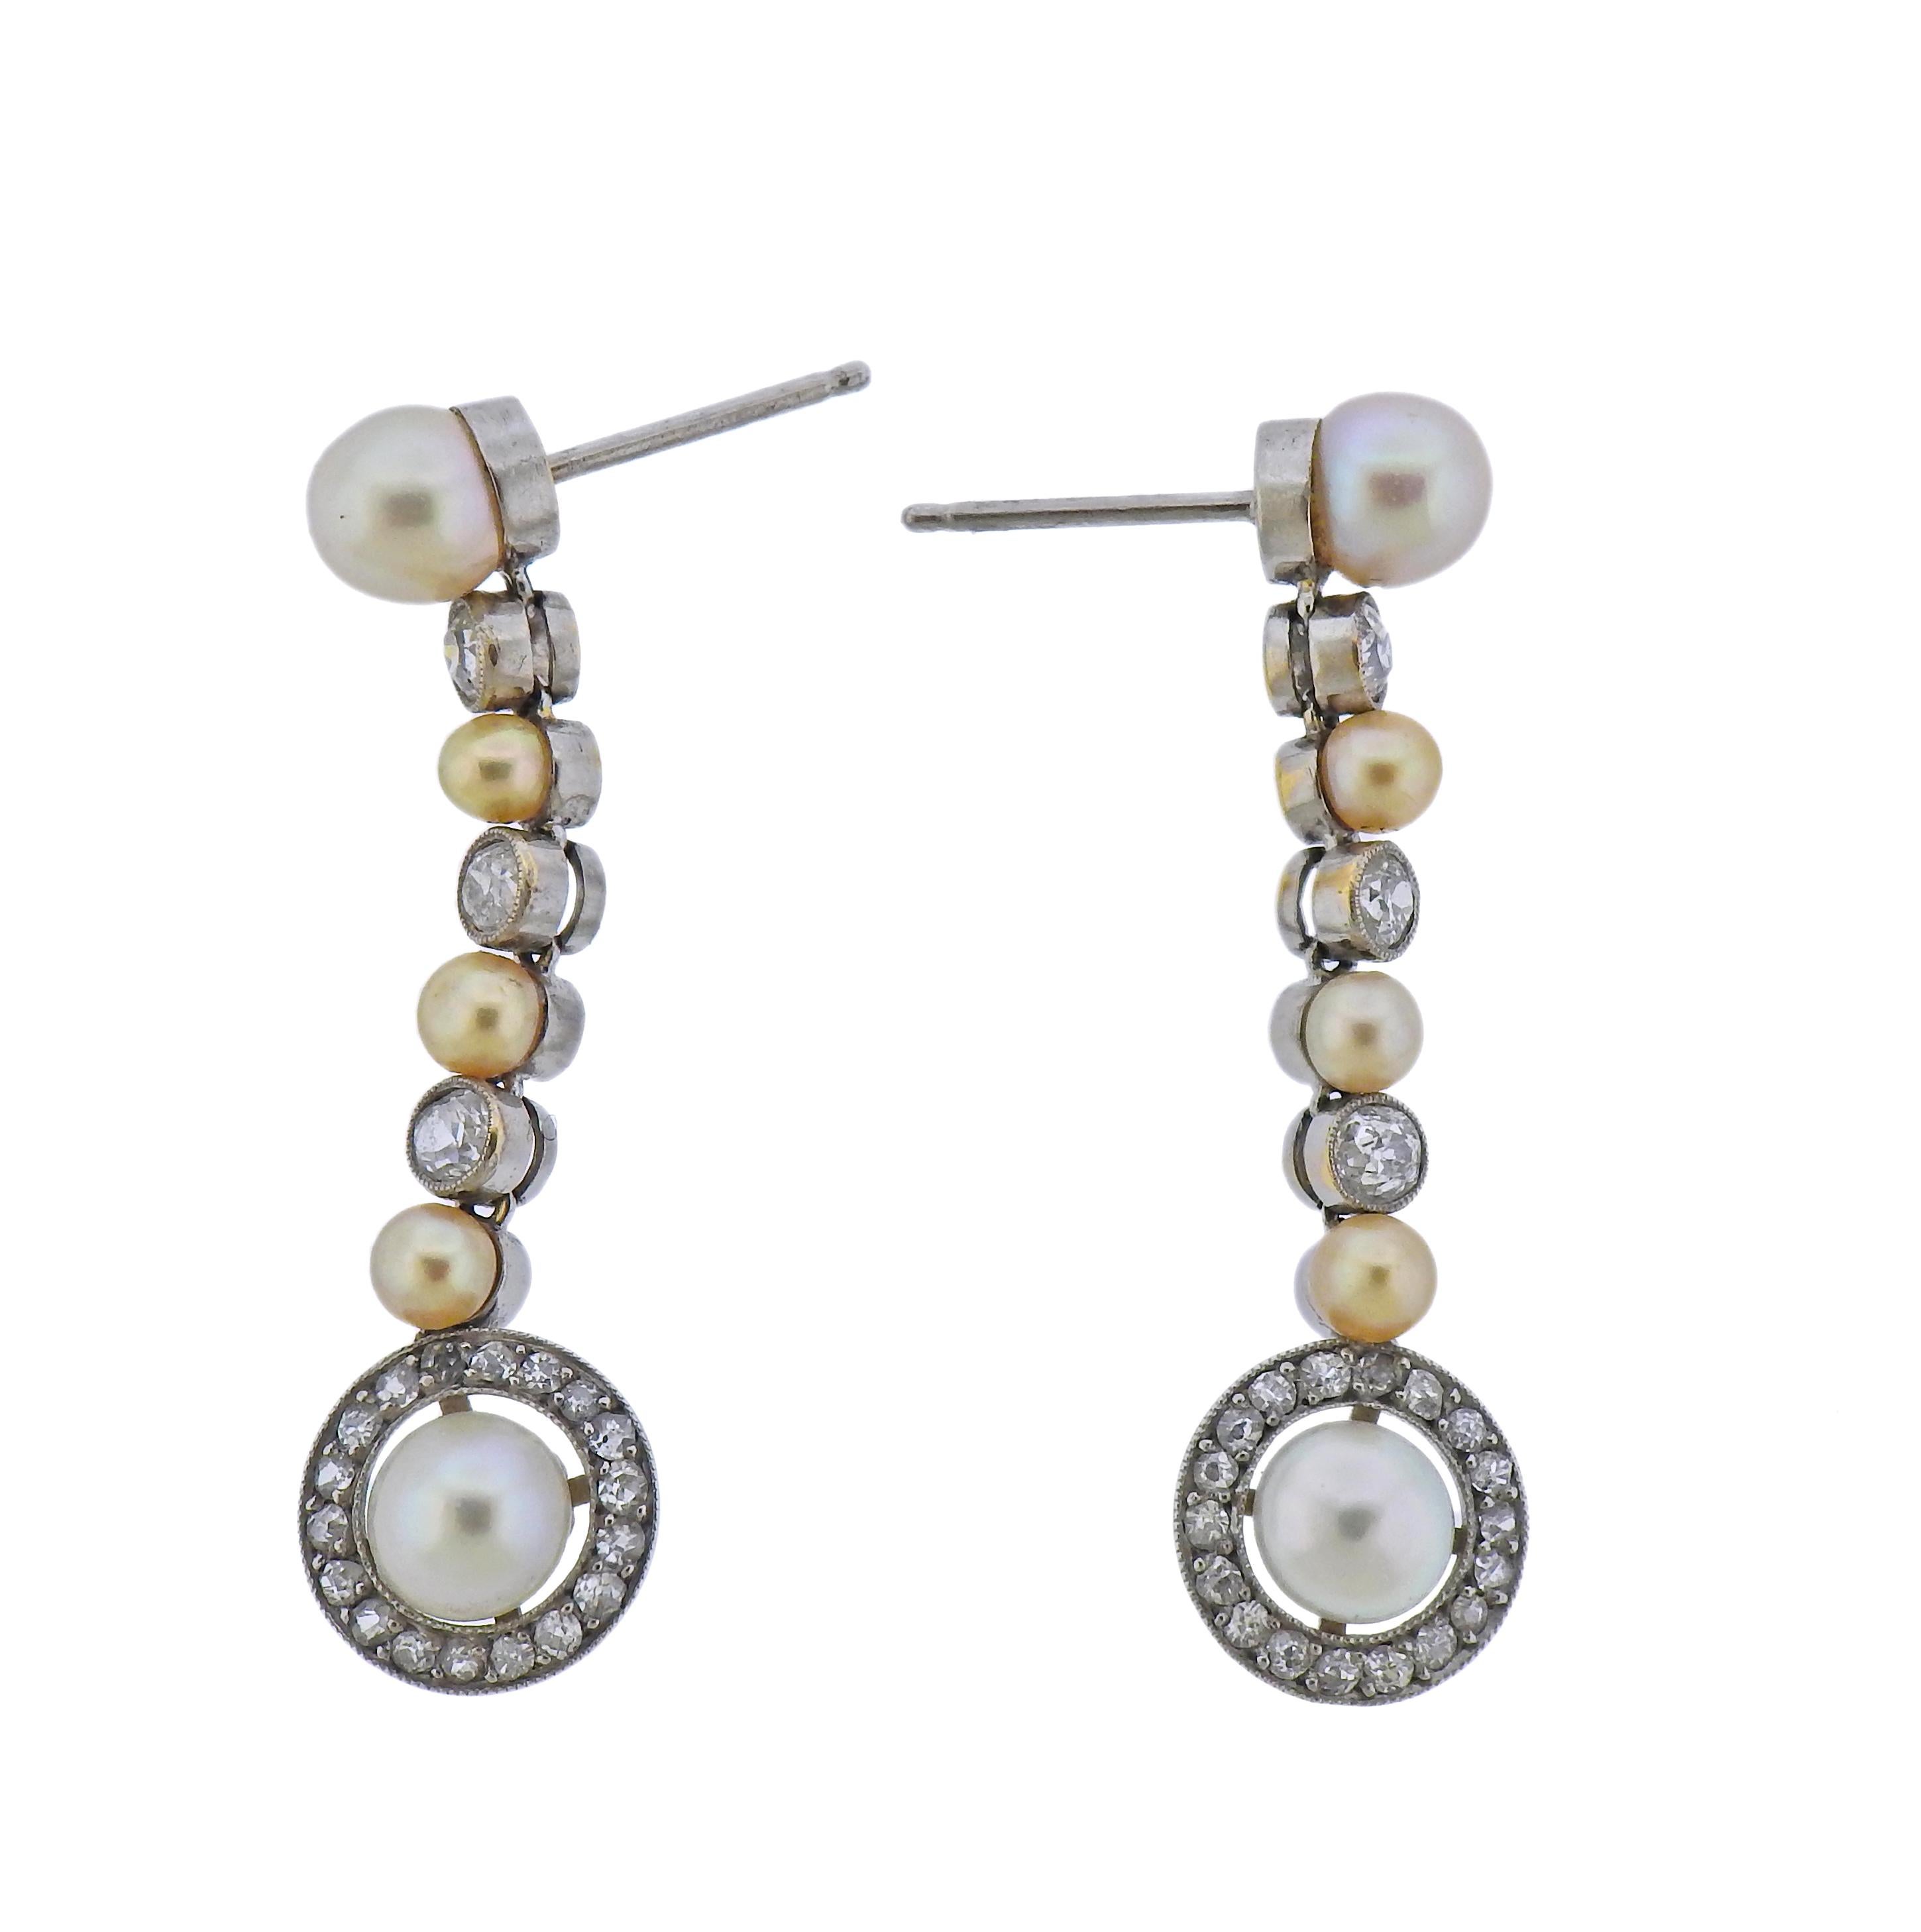 Pair of 18k gold long drop earrings, with 0.80ctw in diamonds and 10.2mm pearls. Earrings are 45mm long. Marked 750. Weight - 11.6 grams.